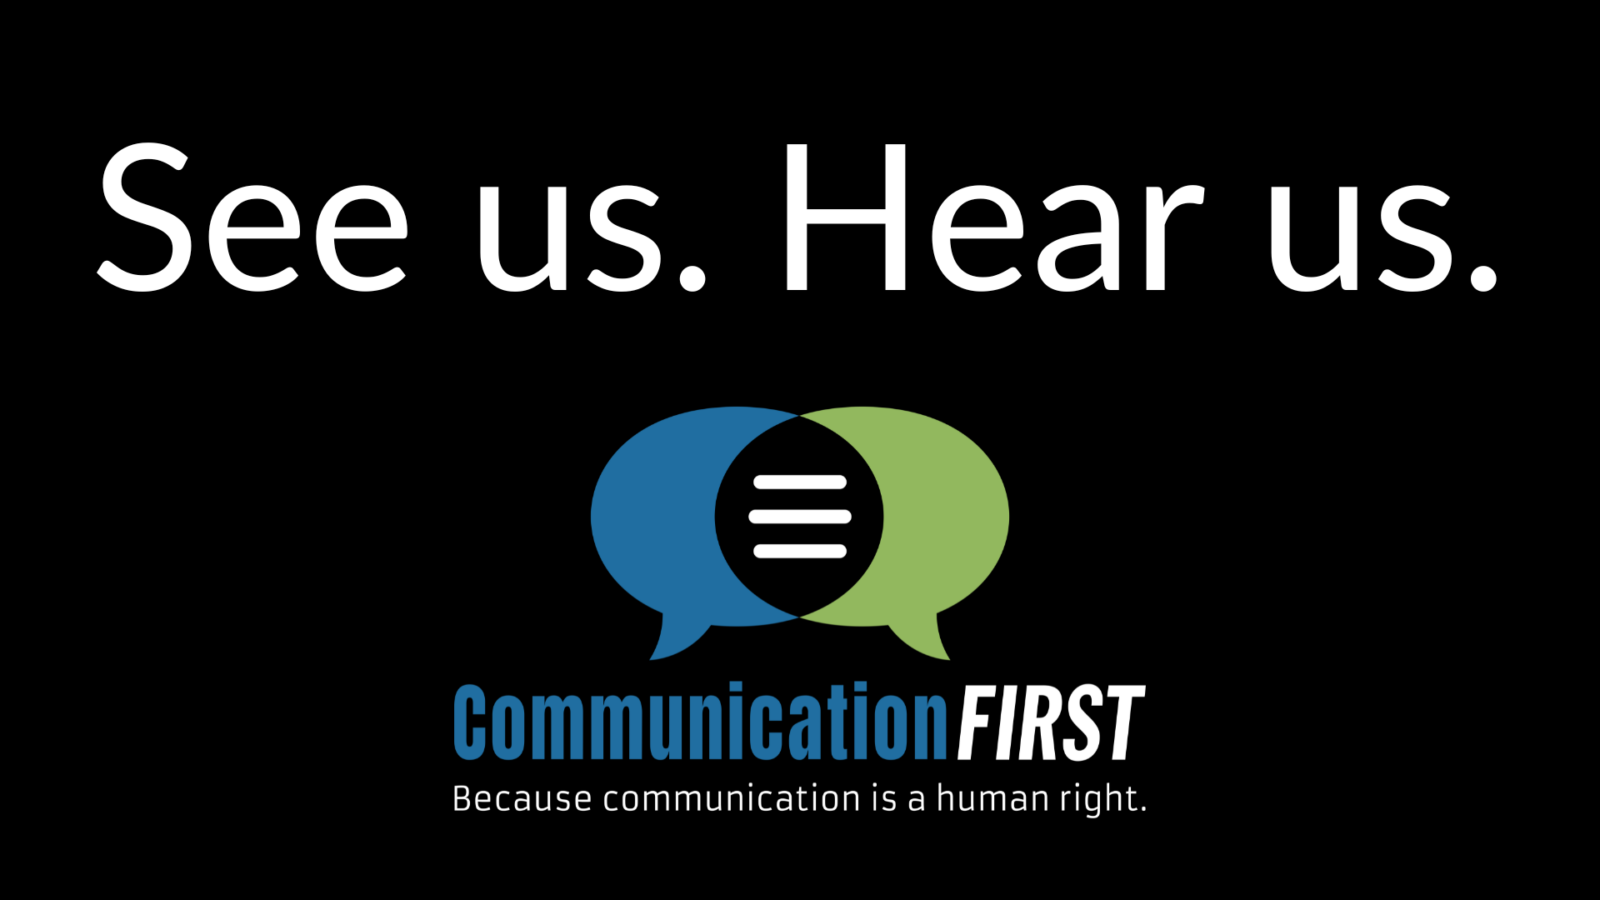 The words "See us. Hear us." with the CommunicationFIRST logo and tagline, "Because communication is a human right."